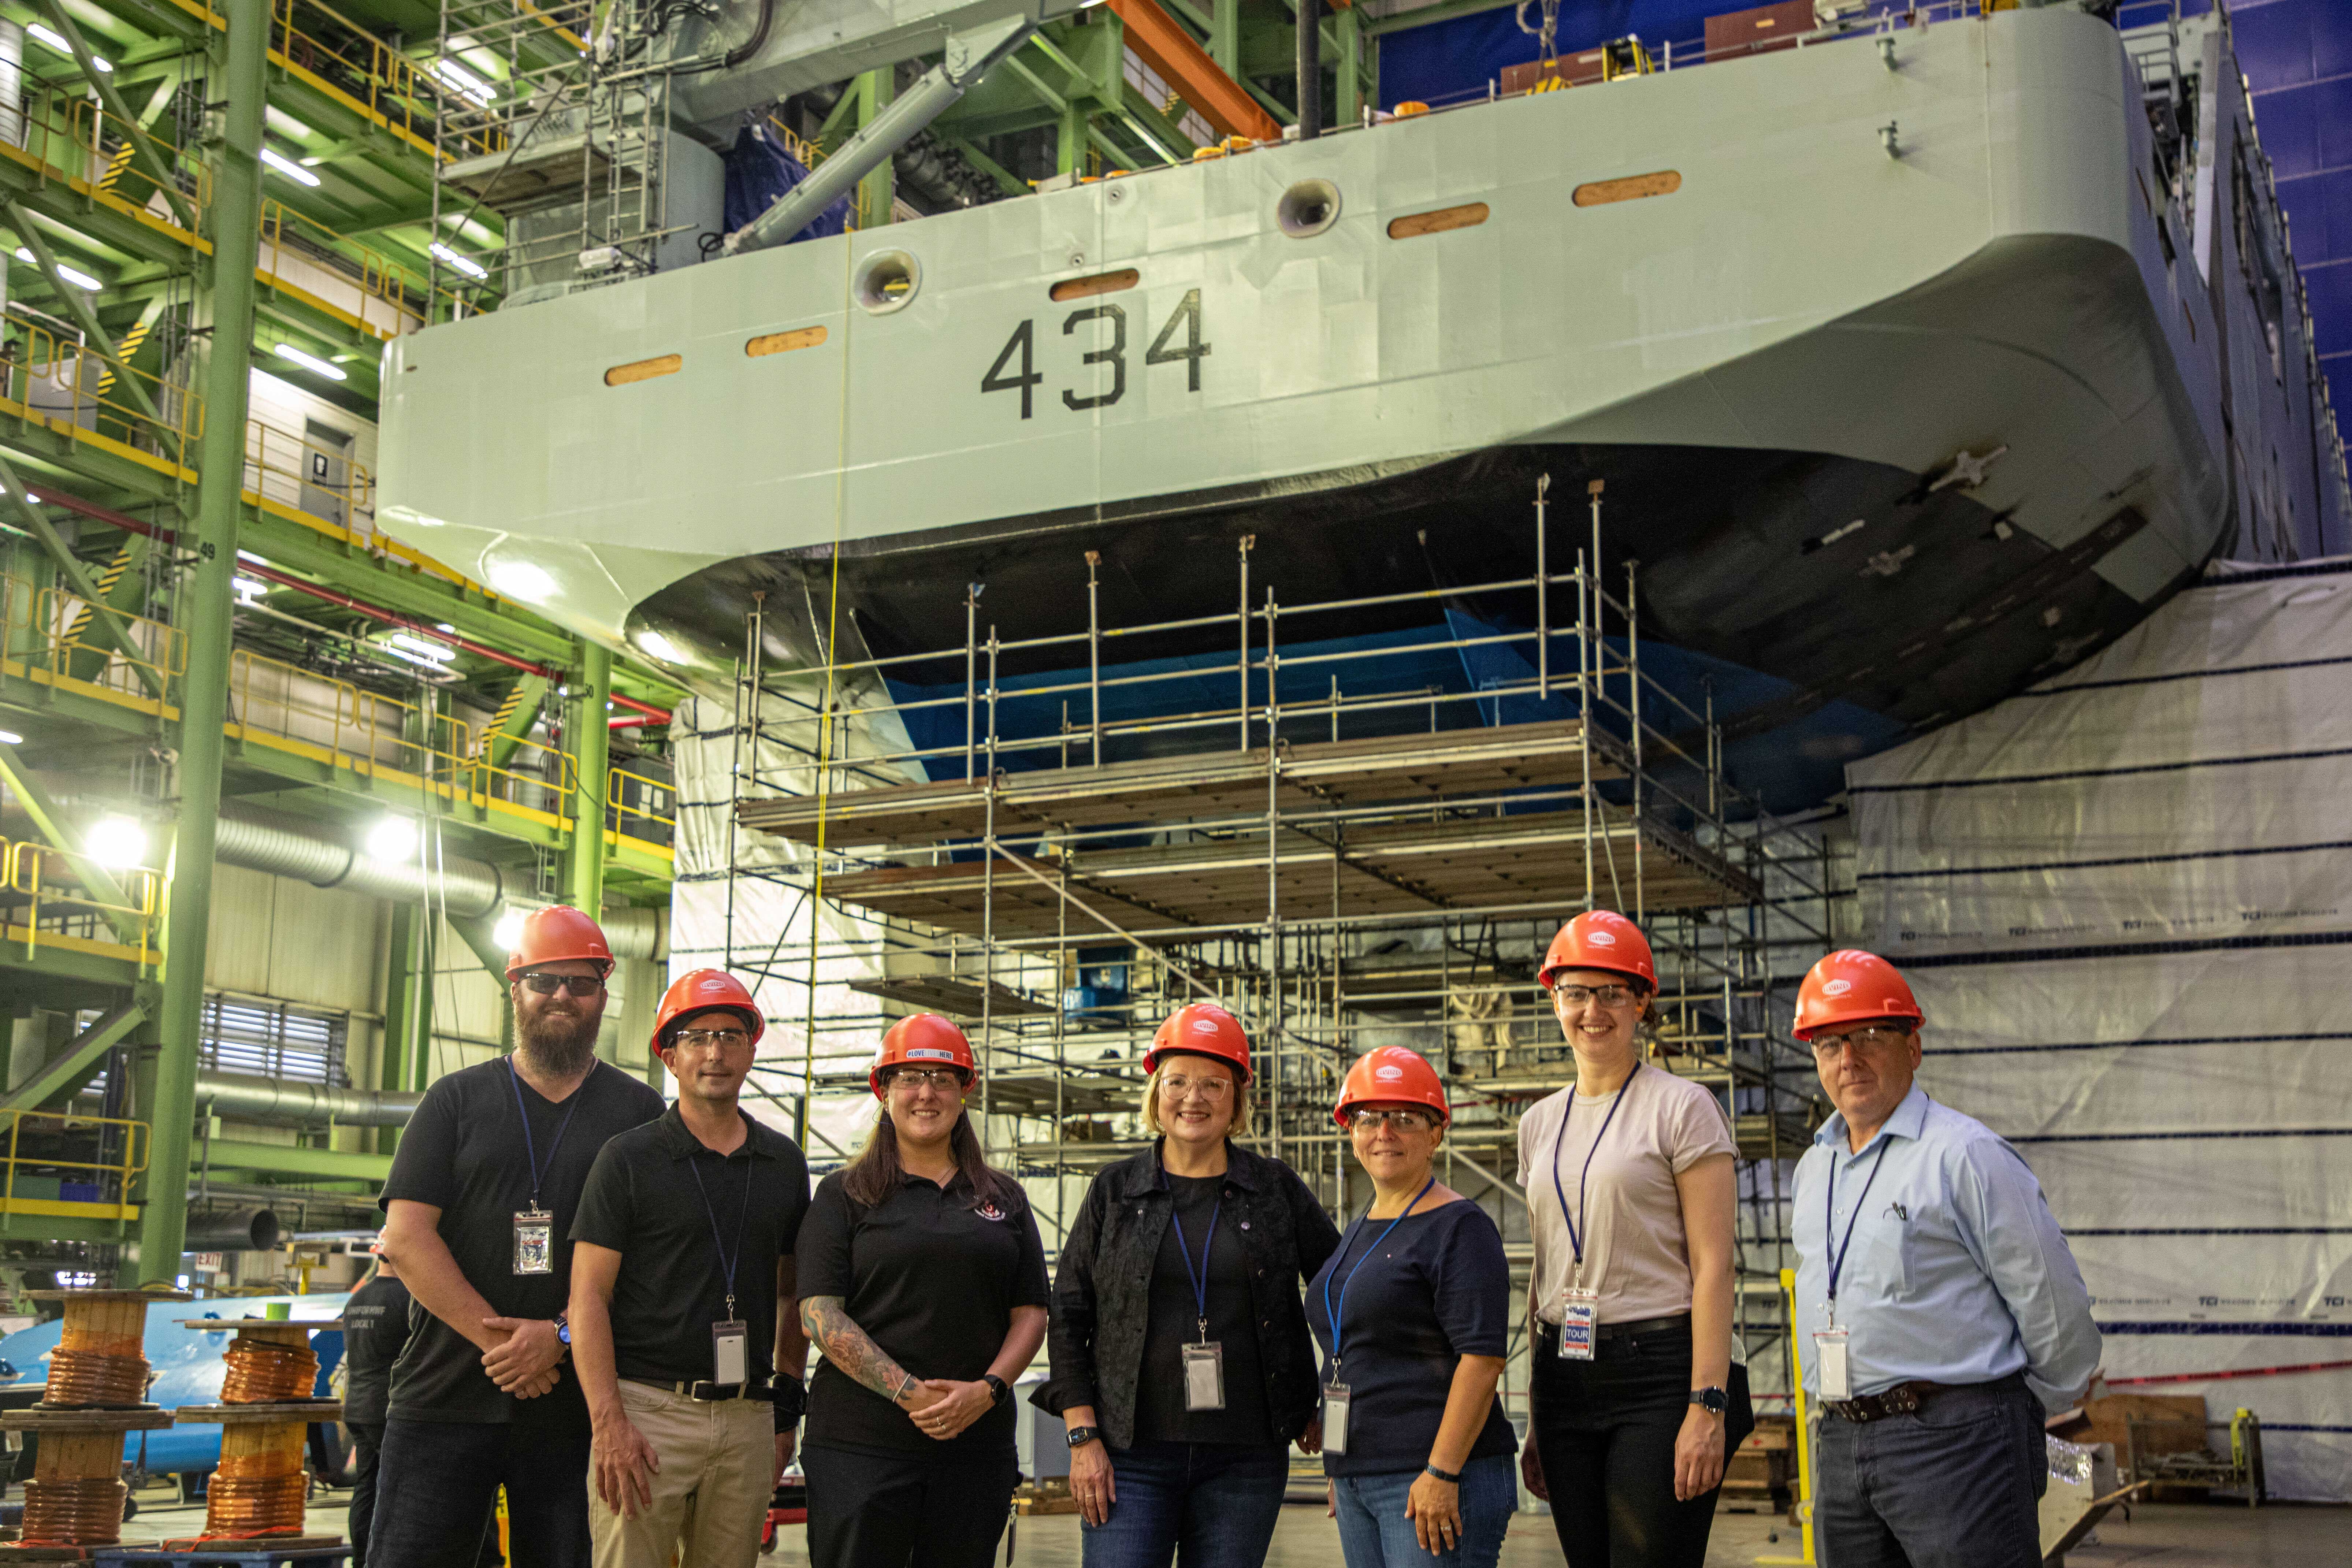 A group of seven standing in front of a stern module wearing hardhats at the Halifax Shipard